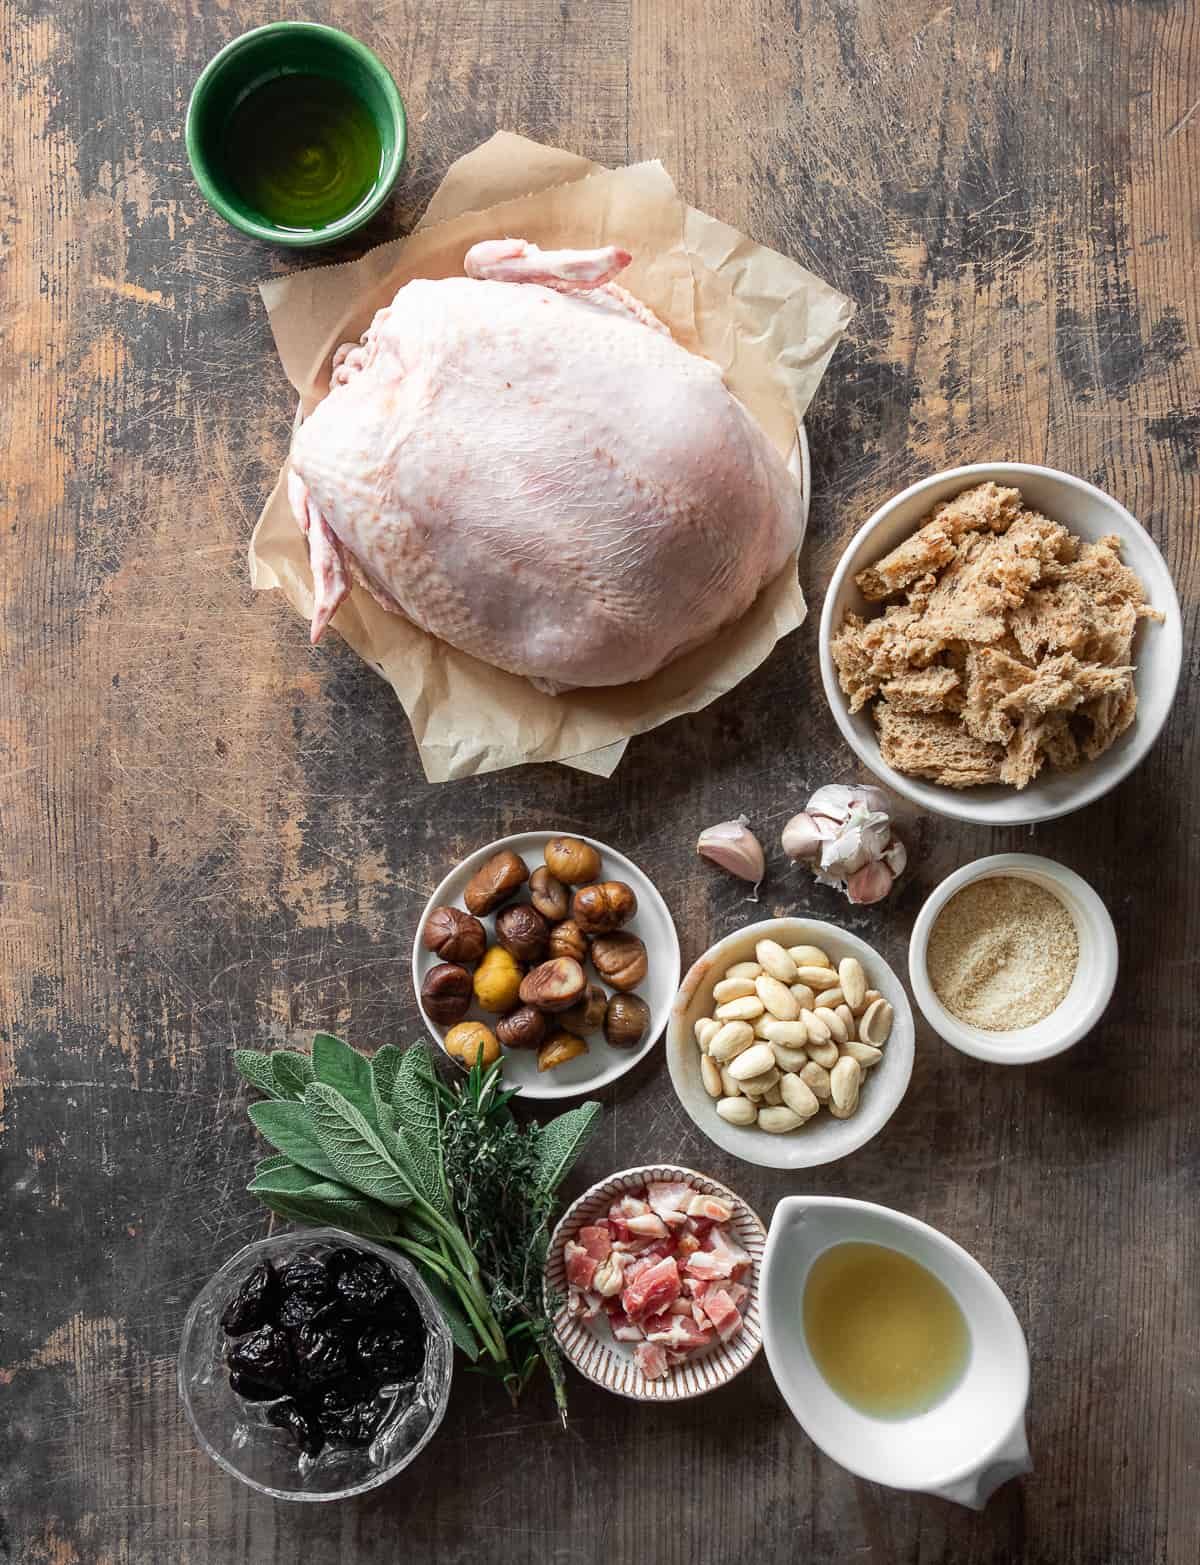 ingredients for roasted chicken with bread stuffing